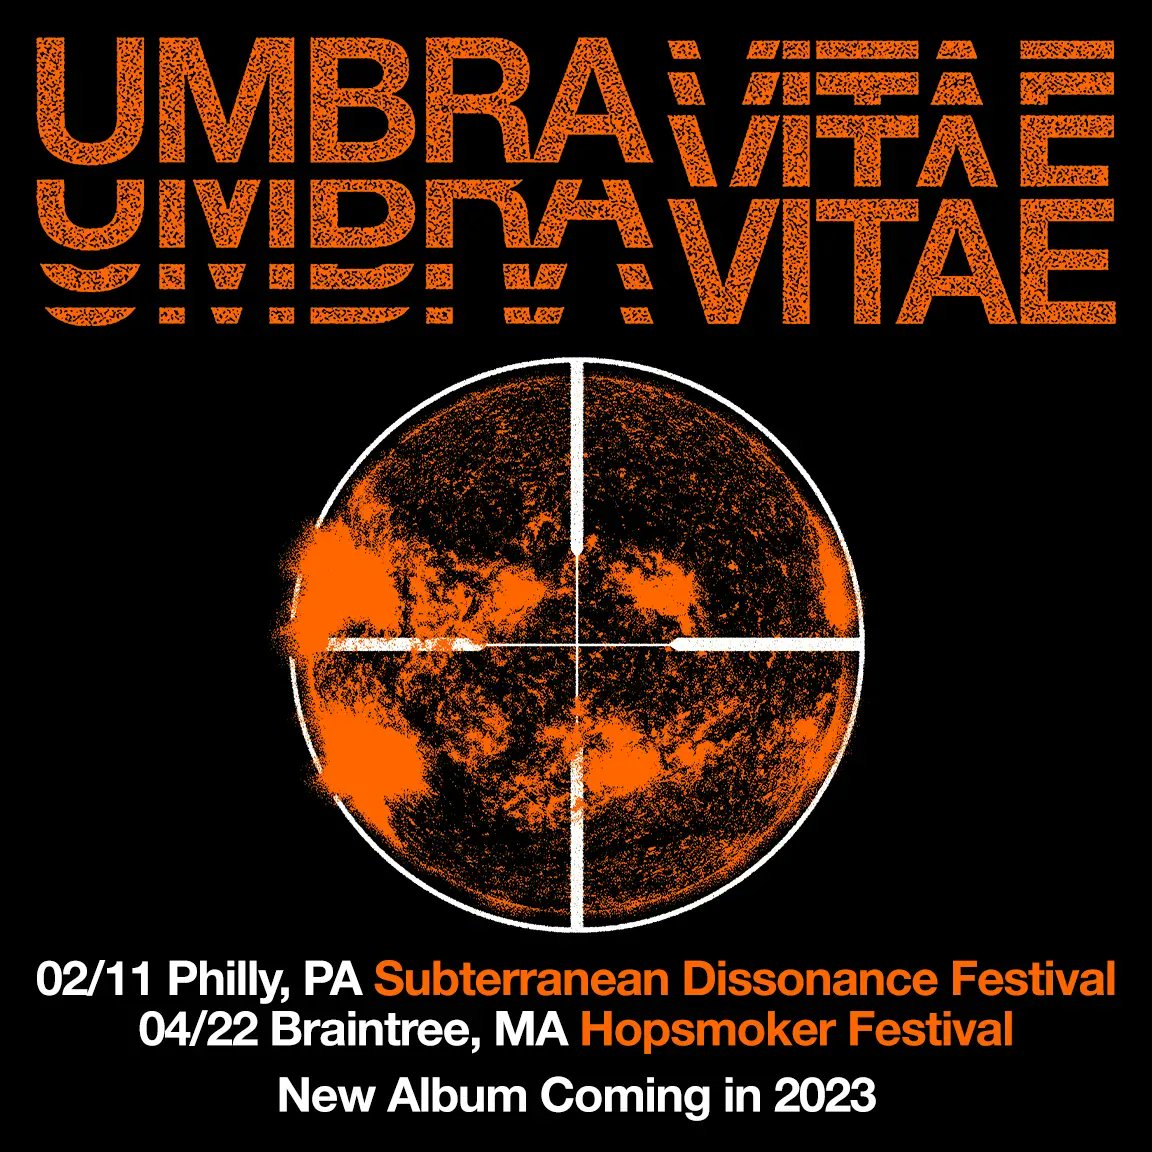 UMBRA VITAE Upcoming Shows (Converge, The Red Chord, Uncle Acid, Wear Your Wounds, ex-Hatebreed members) 02/11: Philly, PA at Subterranean Dissonance Festival 04/22: Braintree, MA at Widowmaker Brewing (Hopsmoker Fest) Merch & Music: dthw.sh/umbravitae